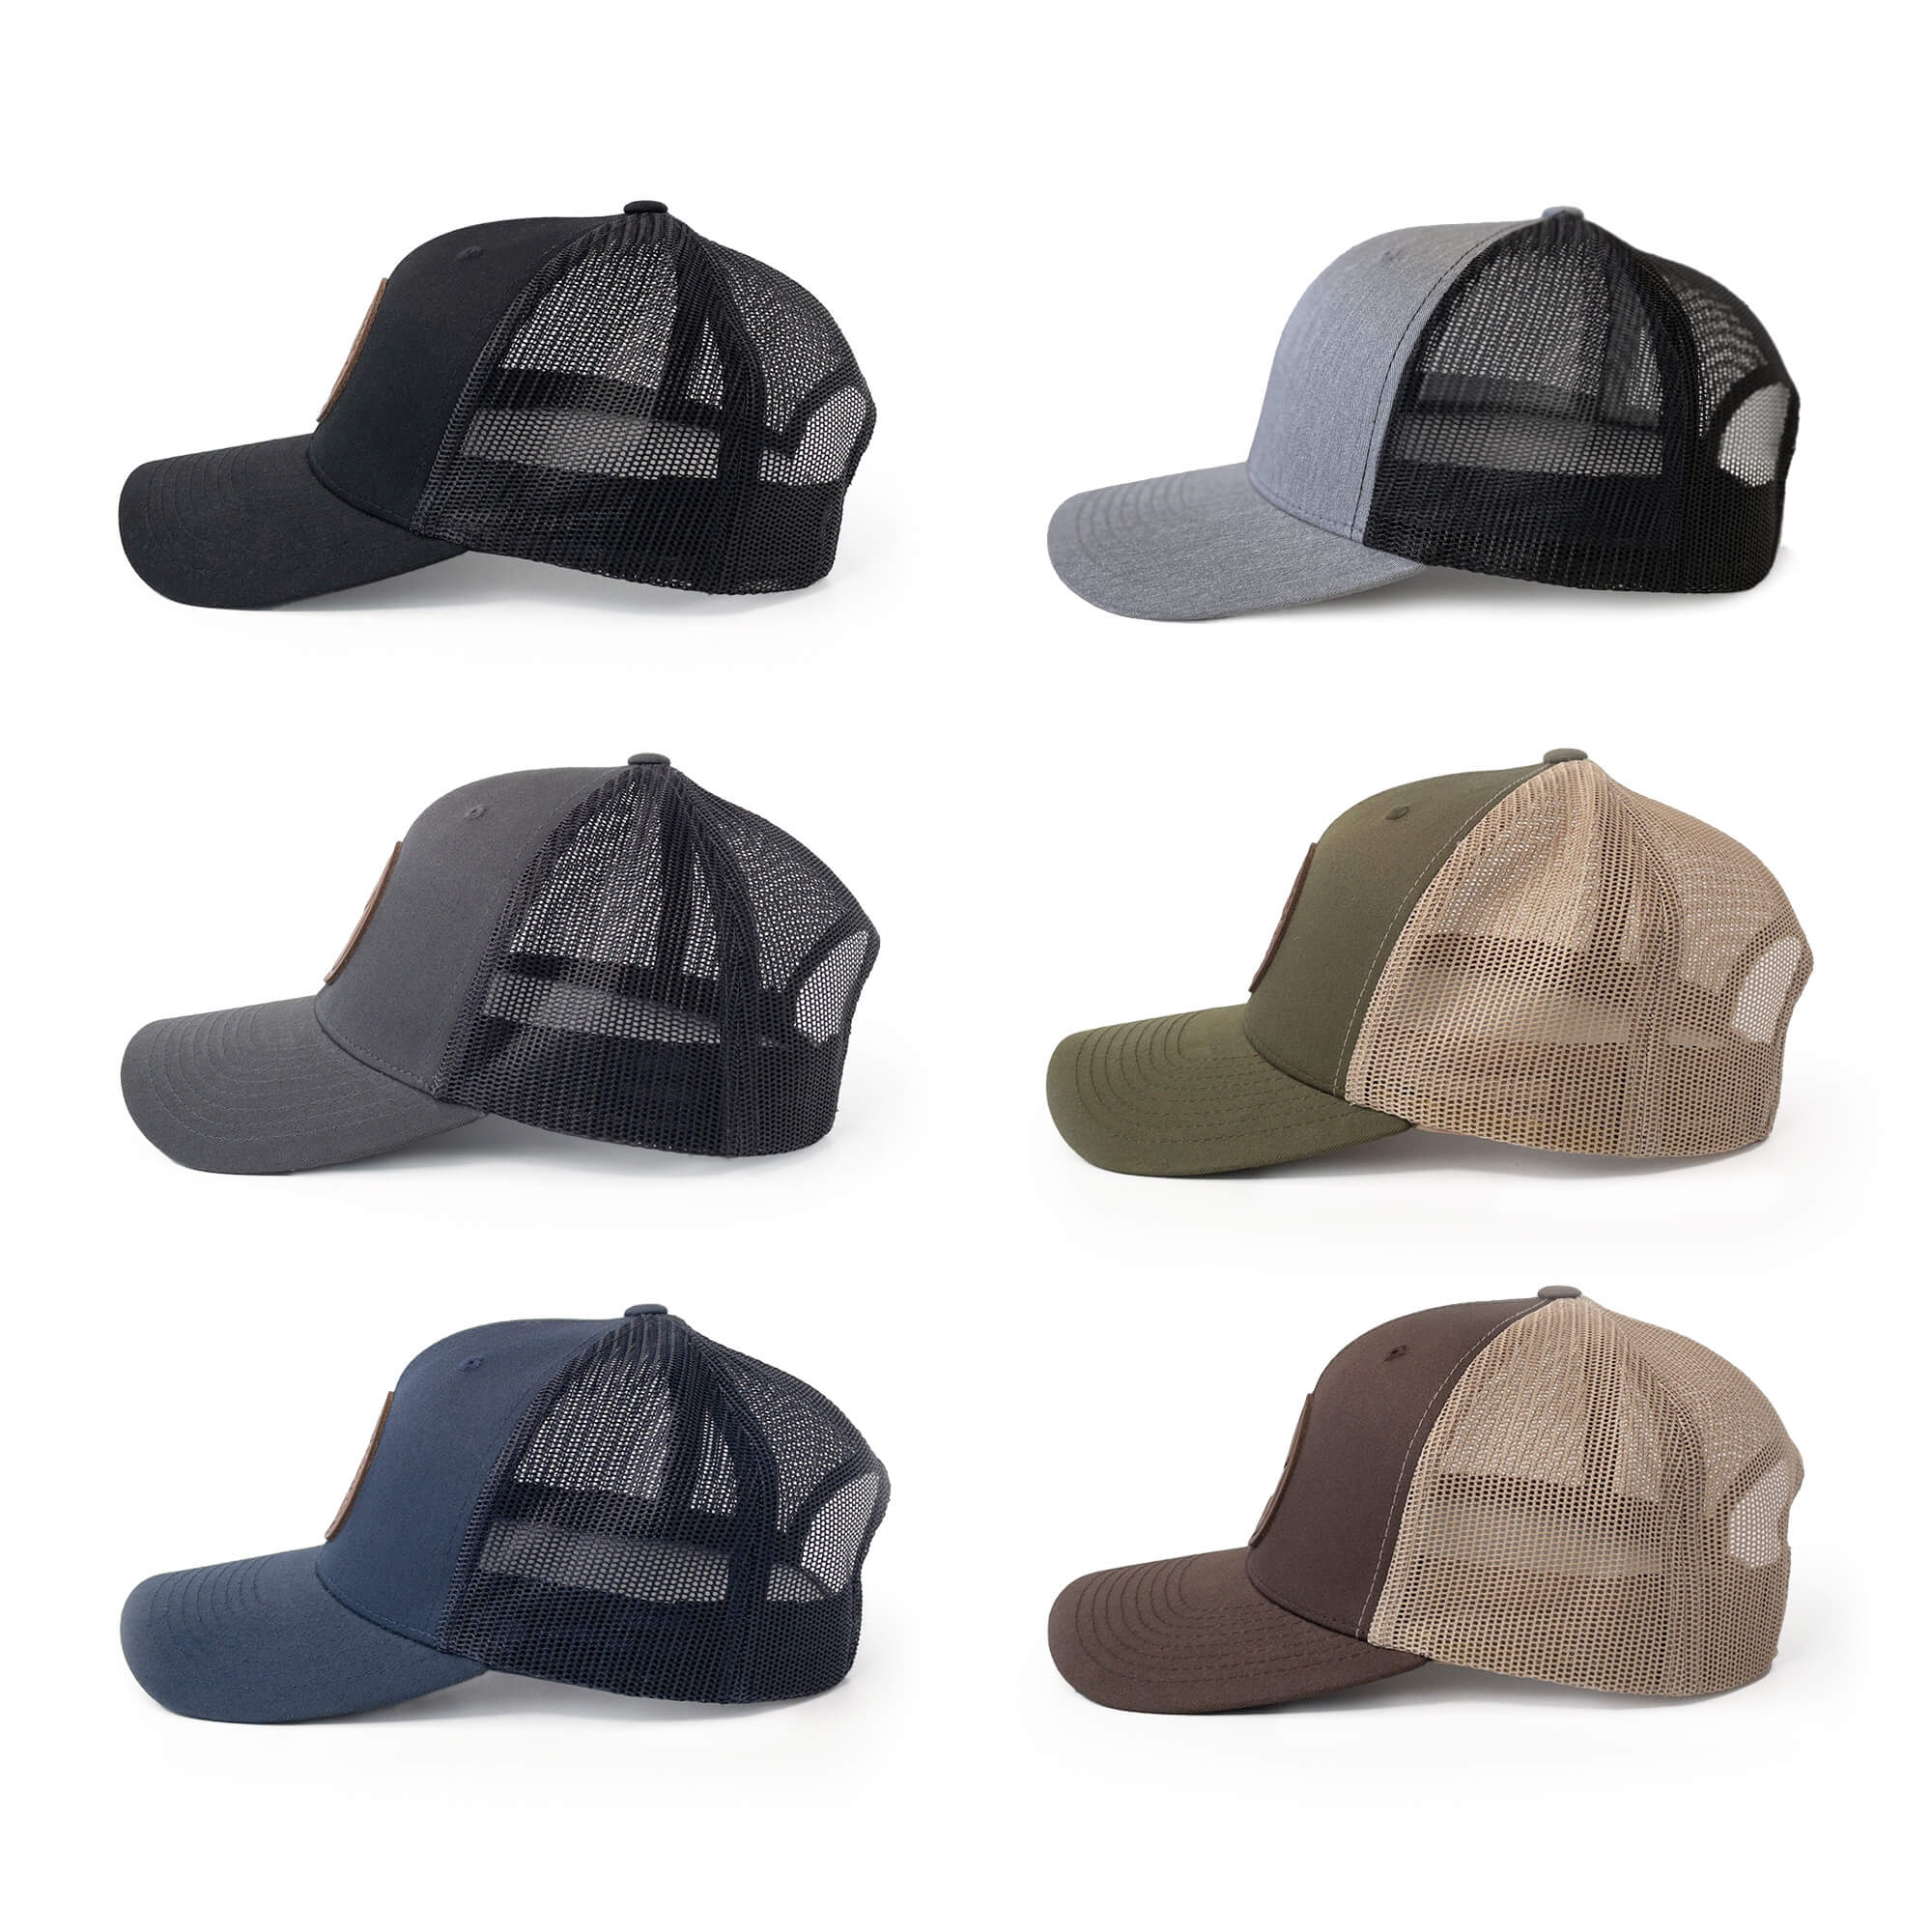 Leather patch trucker hats available in 6 colors | BLACK-004-003, CHARC-004-003, NAVY-004-003, HGREY-004-003, MOSS-004-003, BROWN-004-003